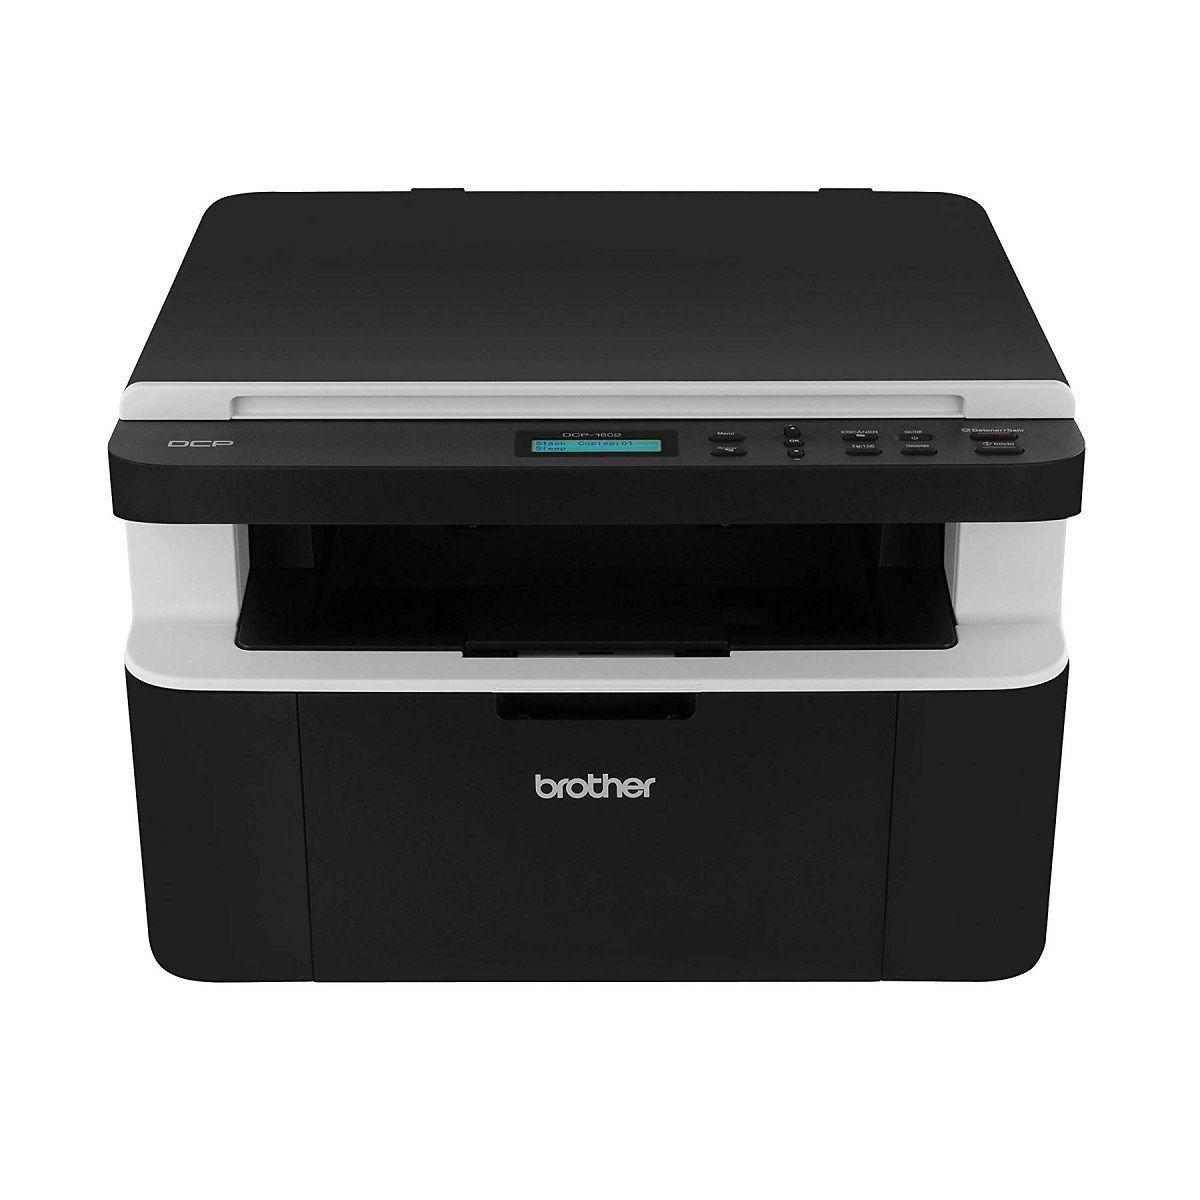 Принтер brother 1602r. Принтер brother DCP 1602. Brother DCP 1600. МФУ brother DCP-330c. Принтер бротхер ДСП 1602r.